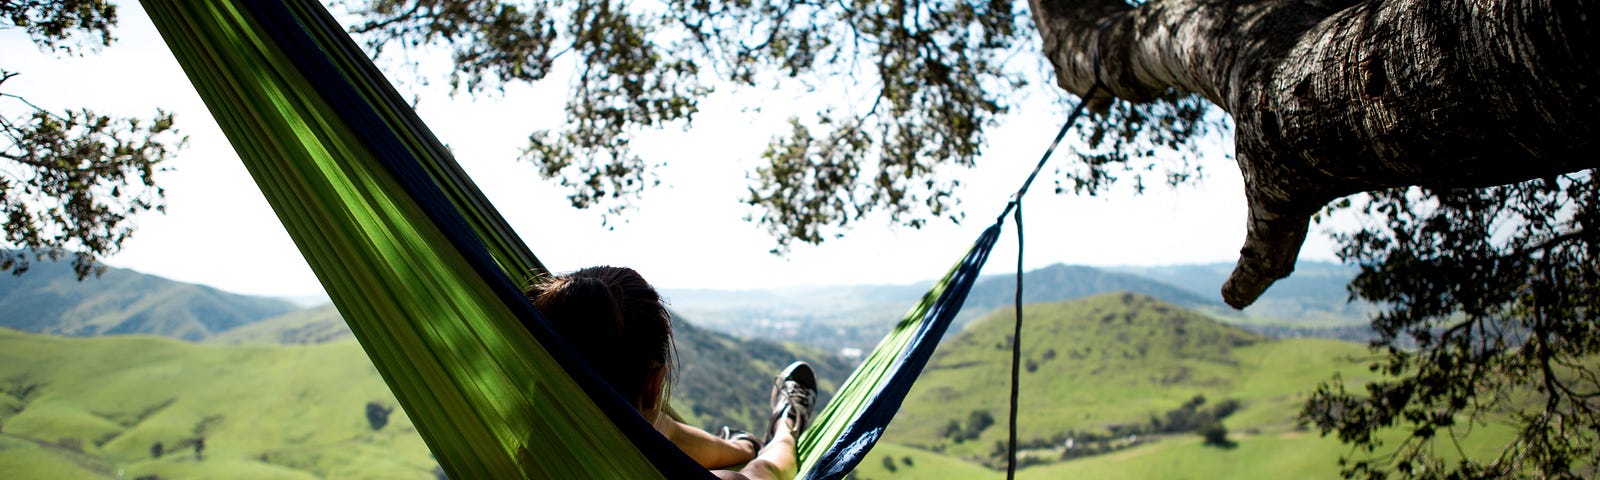 this is a photo of a child on a hammock looking at a hillside